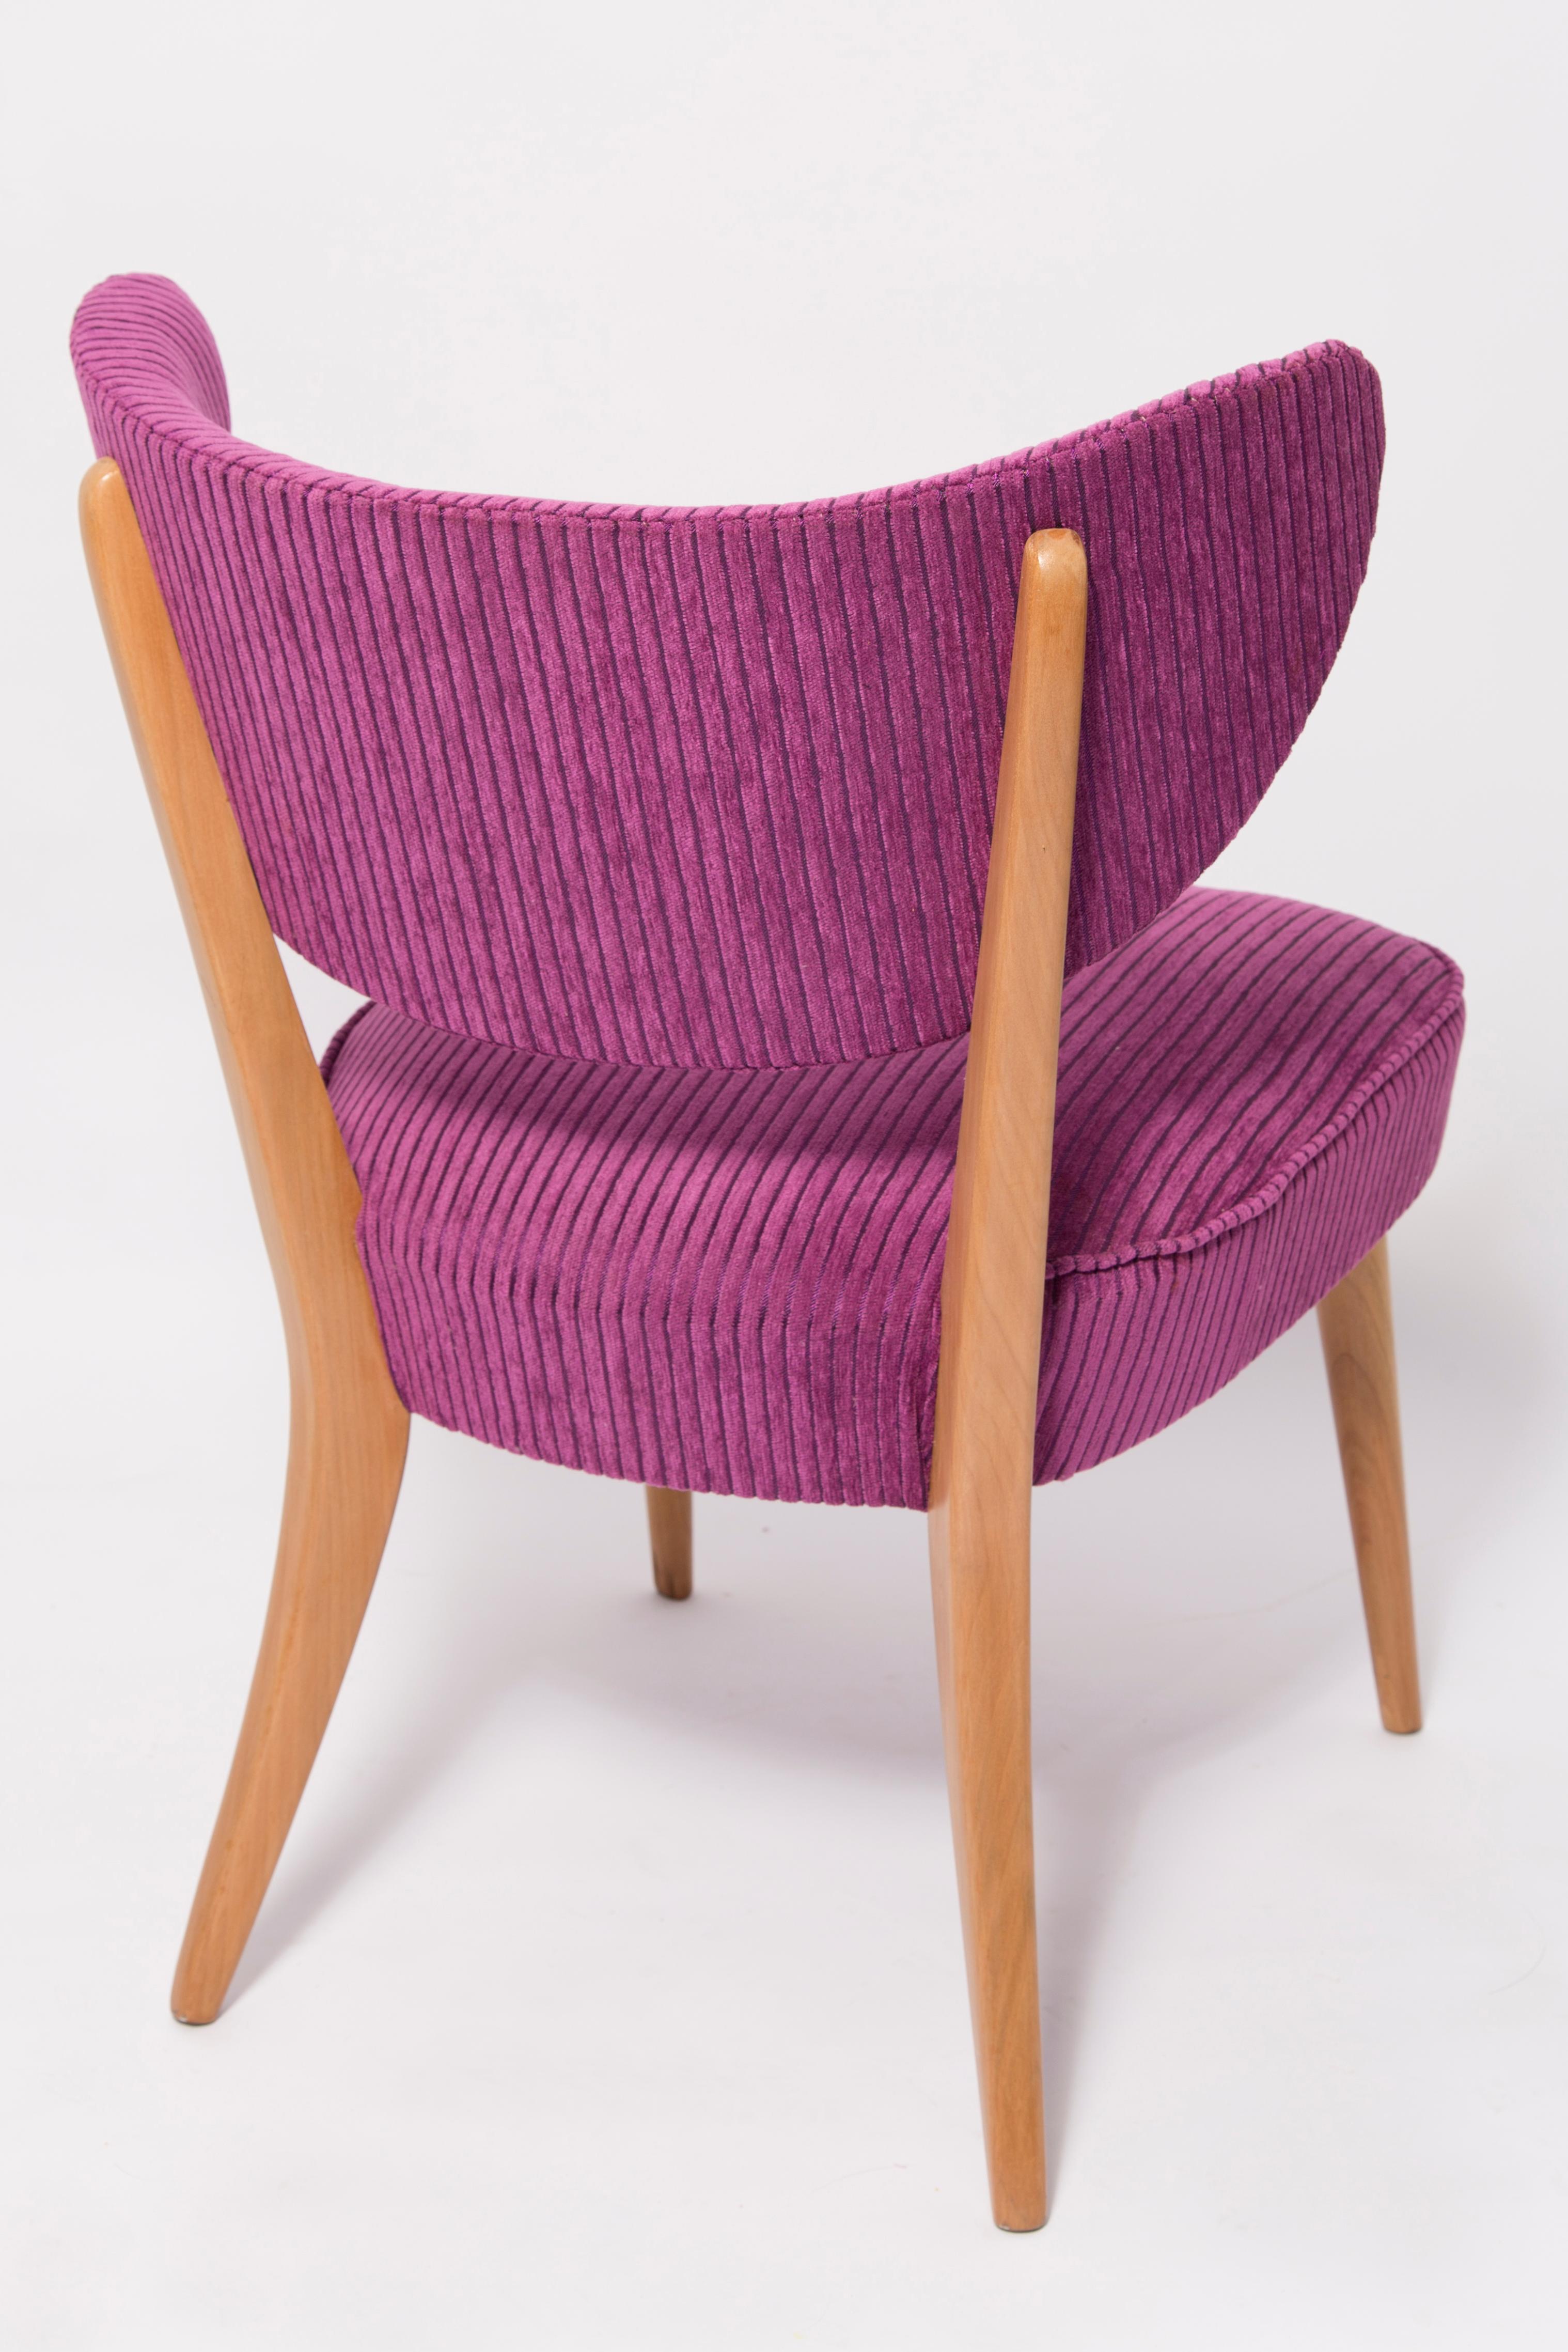 Hand-Crafted Mid Century Violet Velvet Club Chair, Europe, 1960s For Sale